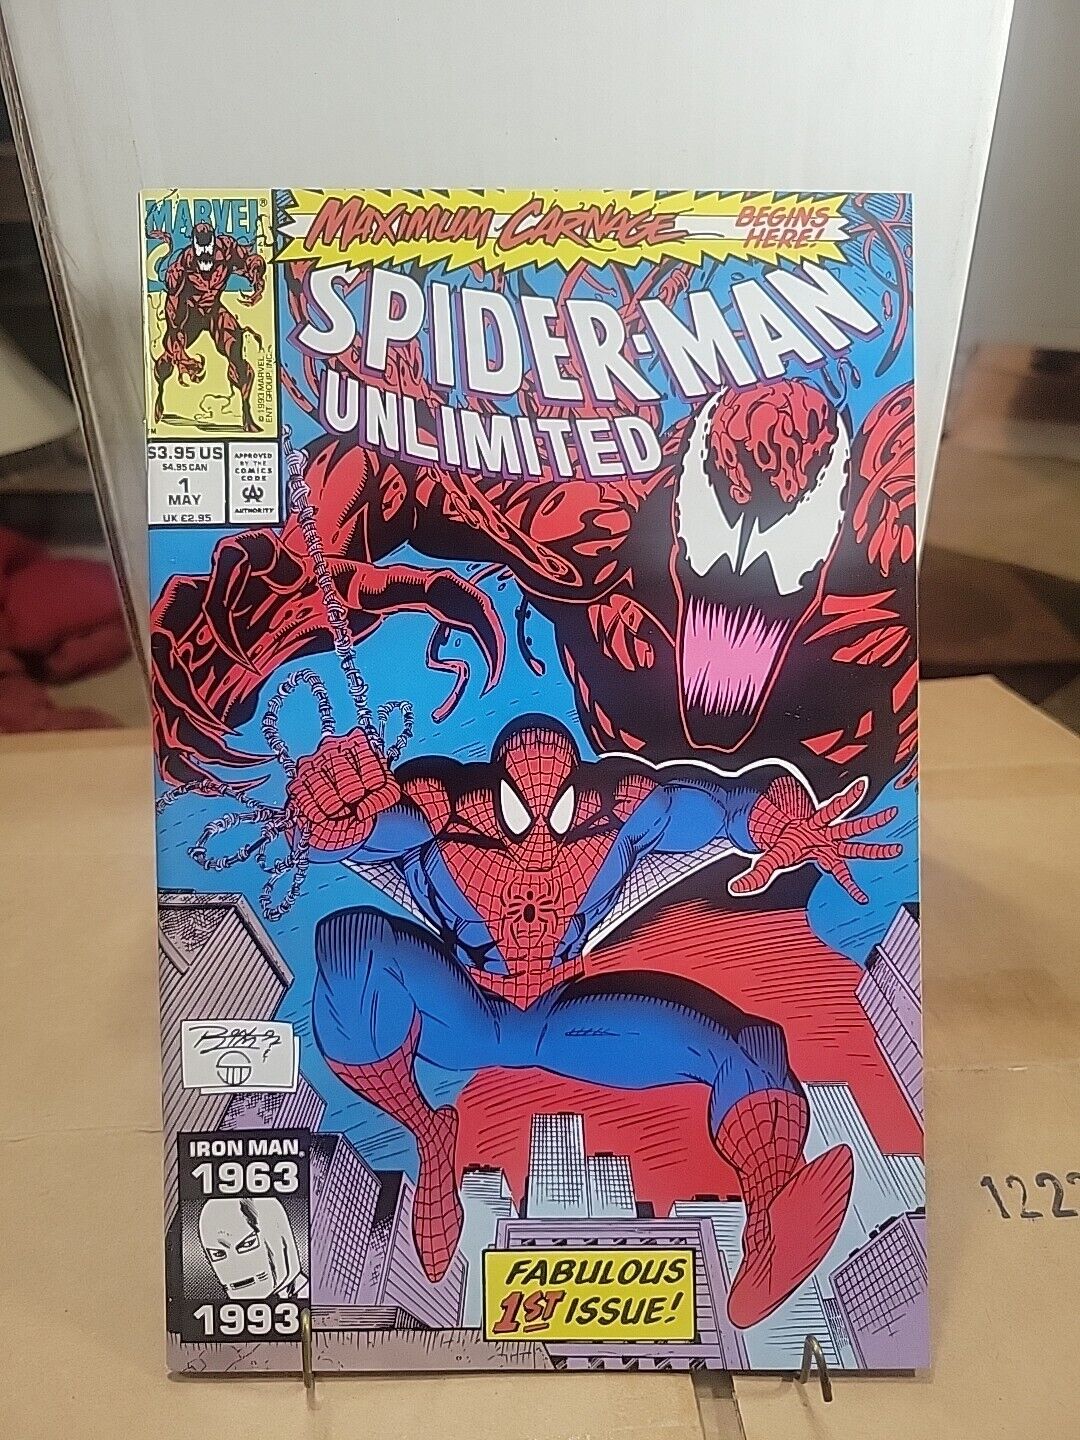 Spider-Man Unlimited #1 Marvel Comics Brand New Maximum Carnage Begins Here